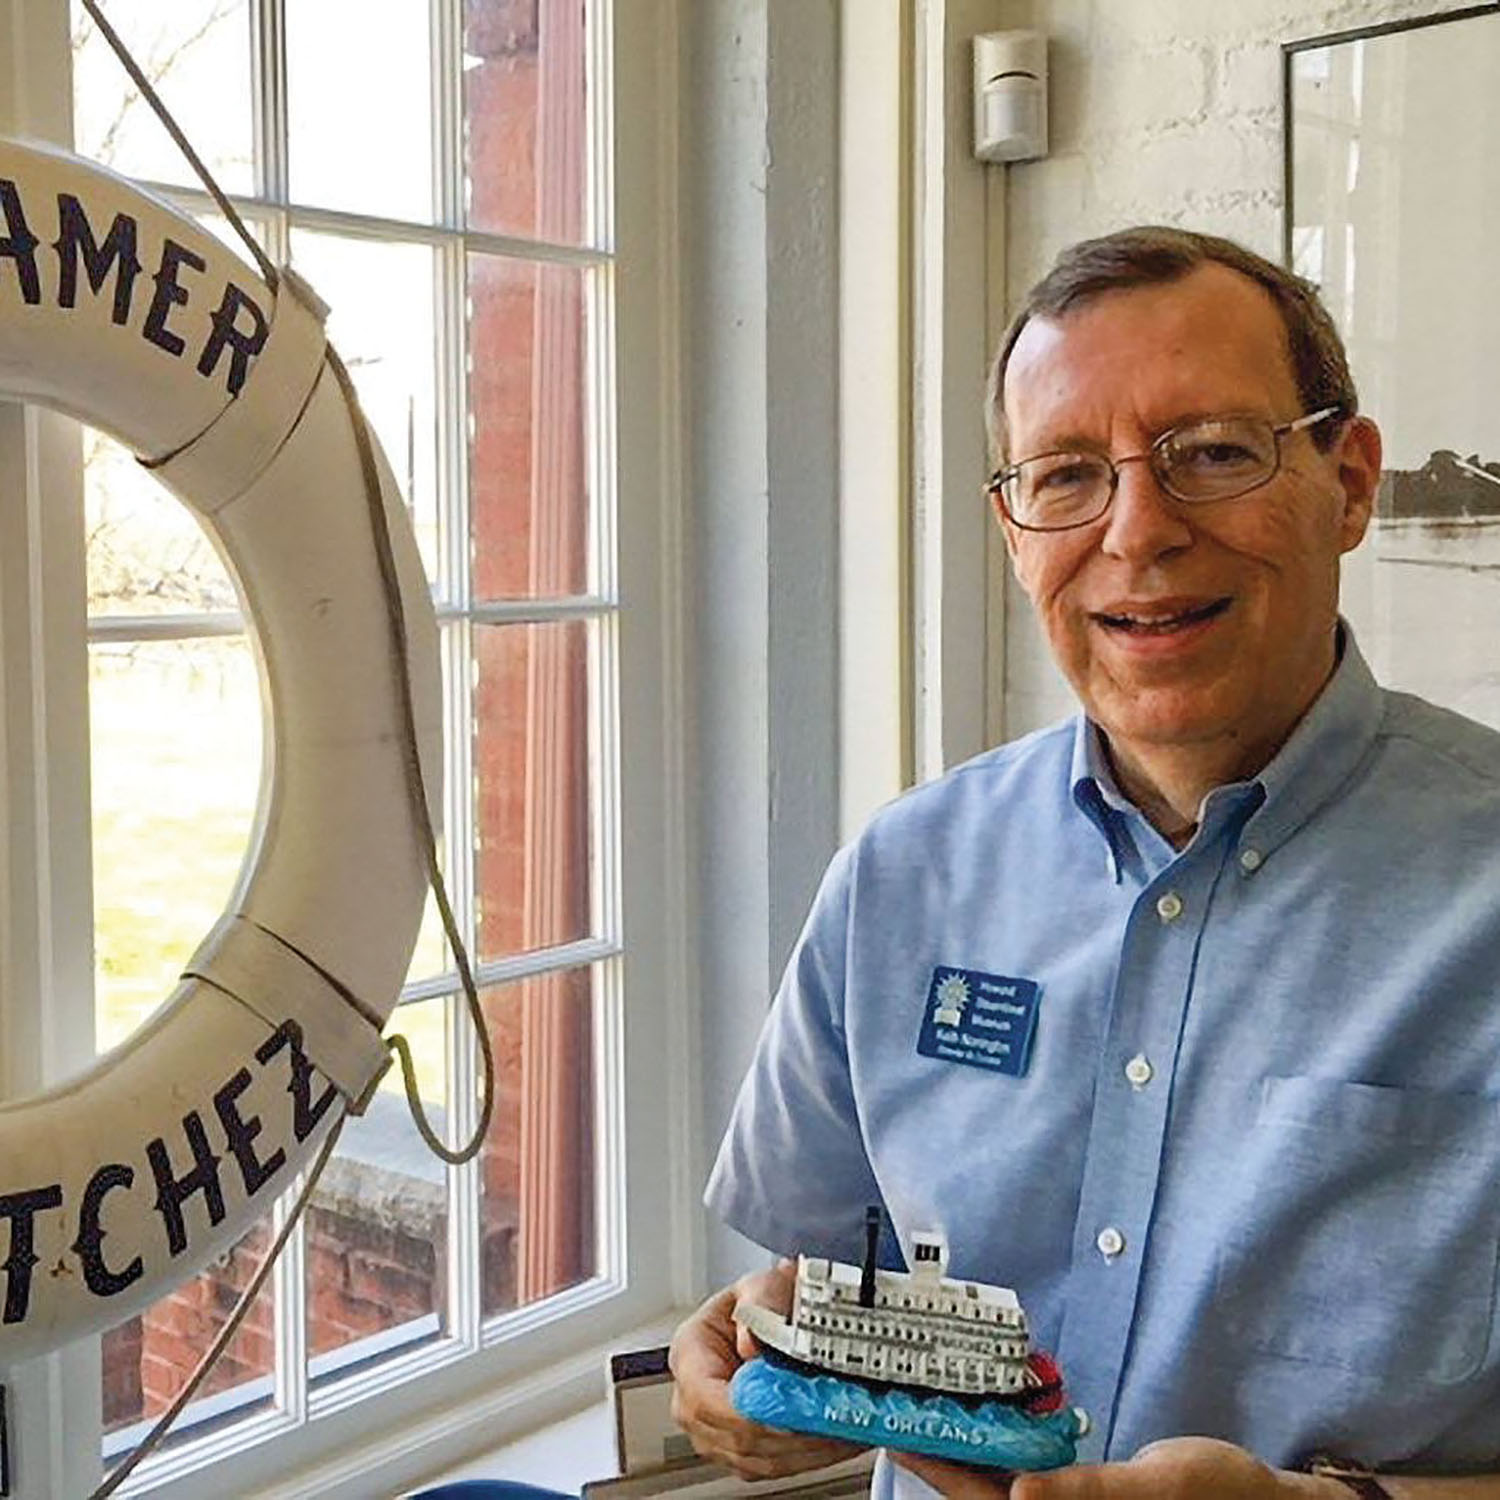 Keith Norrington, former curator of the Howard Steamboat Museum and WJ Old Boat columnist, passed away August 30.